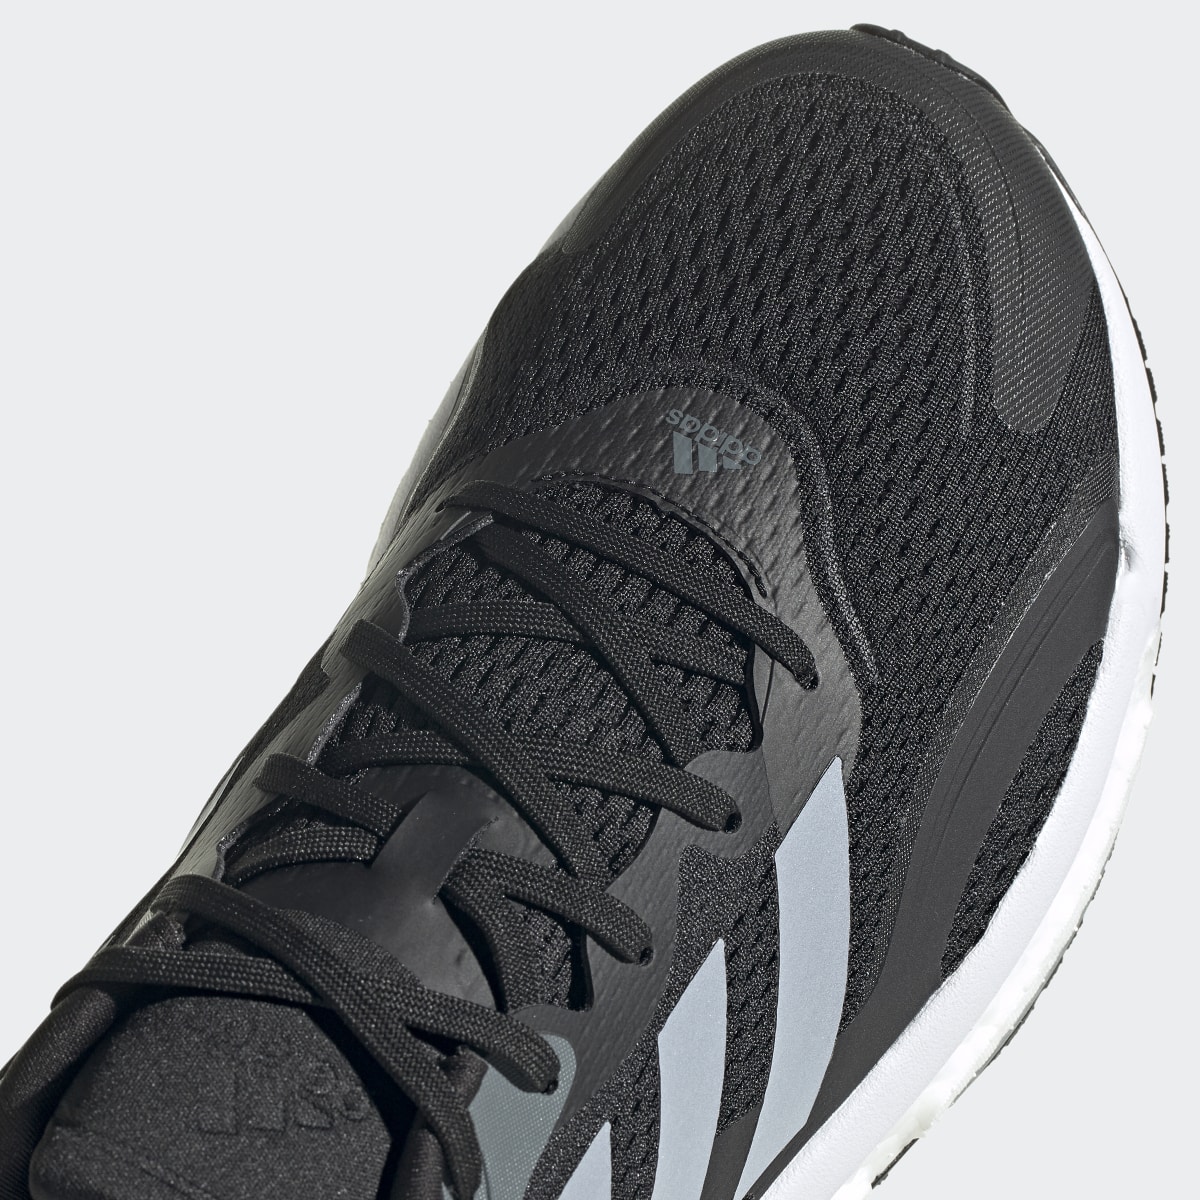 Adidas SolarBoost 3 Shoes. 10